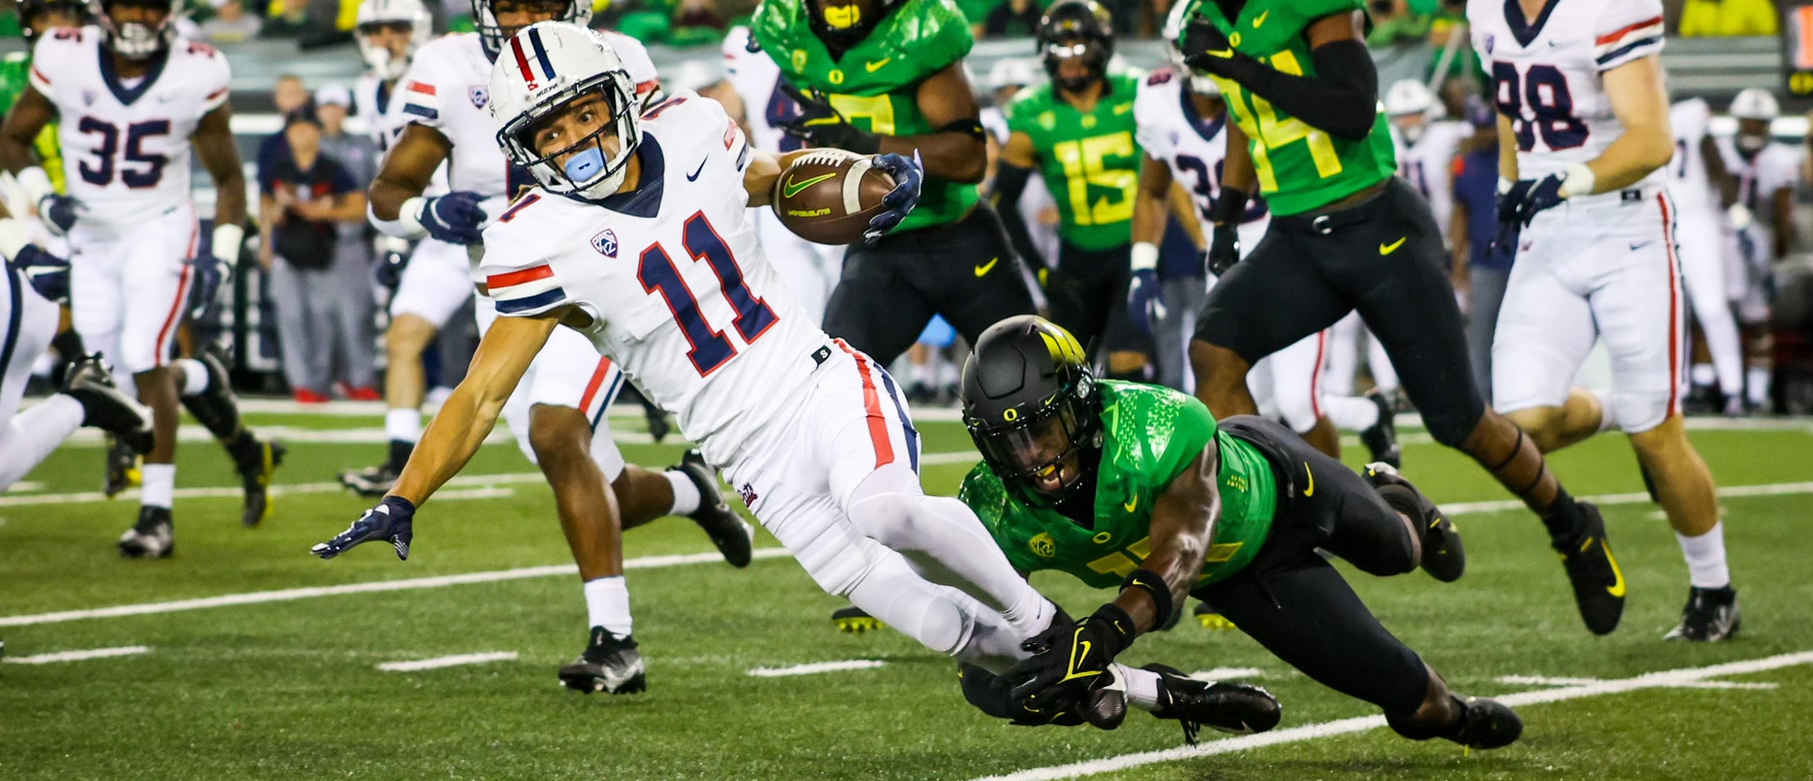 Ducks Playing Down to Their Opponents Could Cost a CFP Appearance